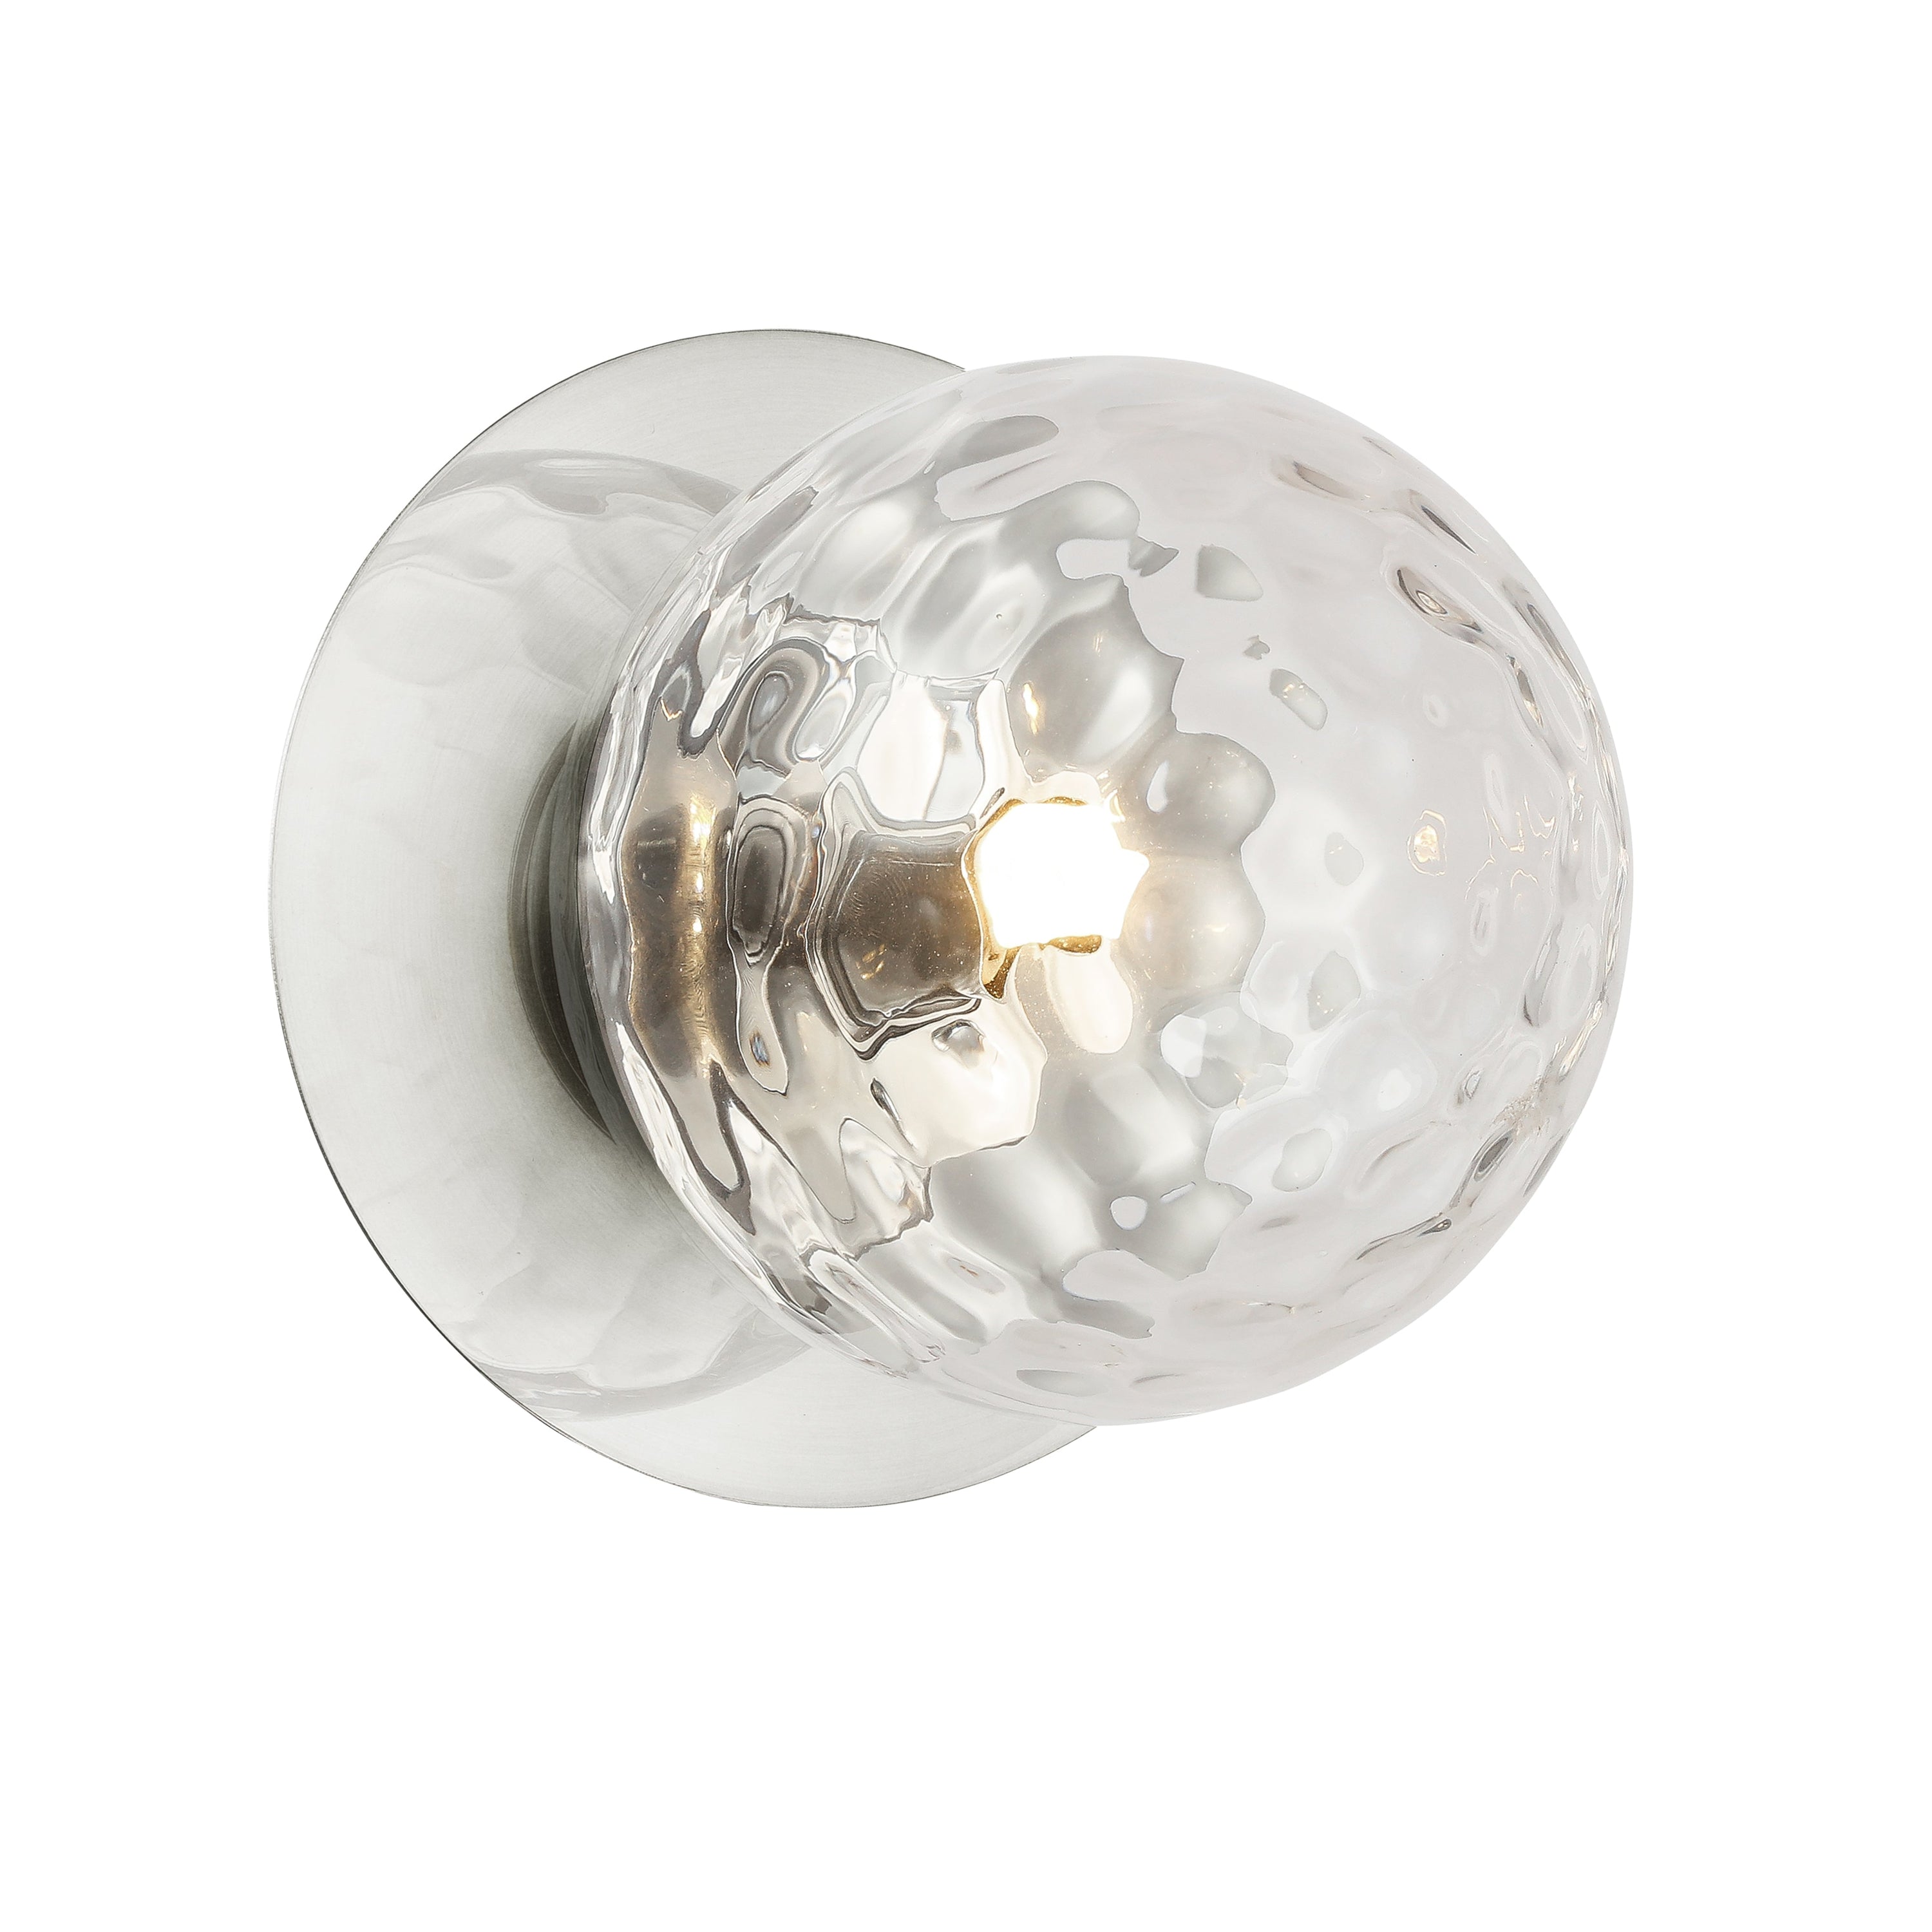 Dainolite Burlat - BUR-51W-PC-CL - 1 Light Wall Sconce, Polished Chrome with Clear Glass - Clear